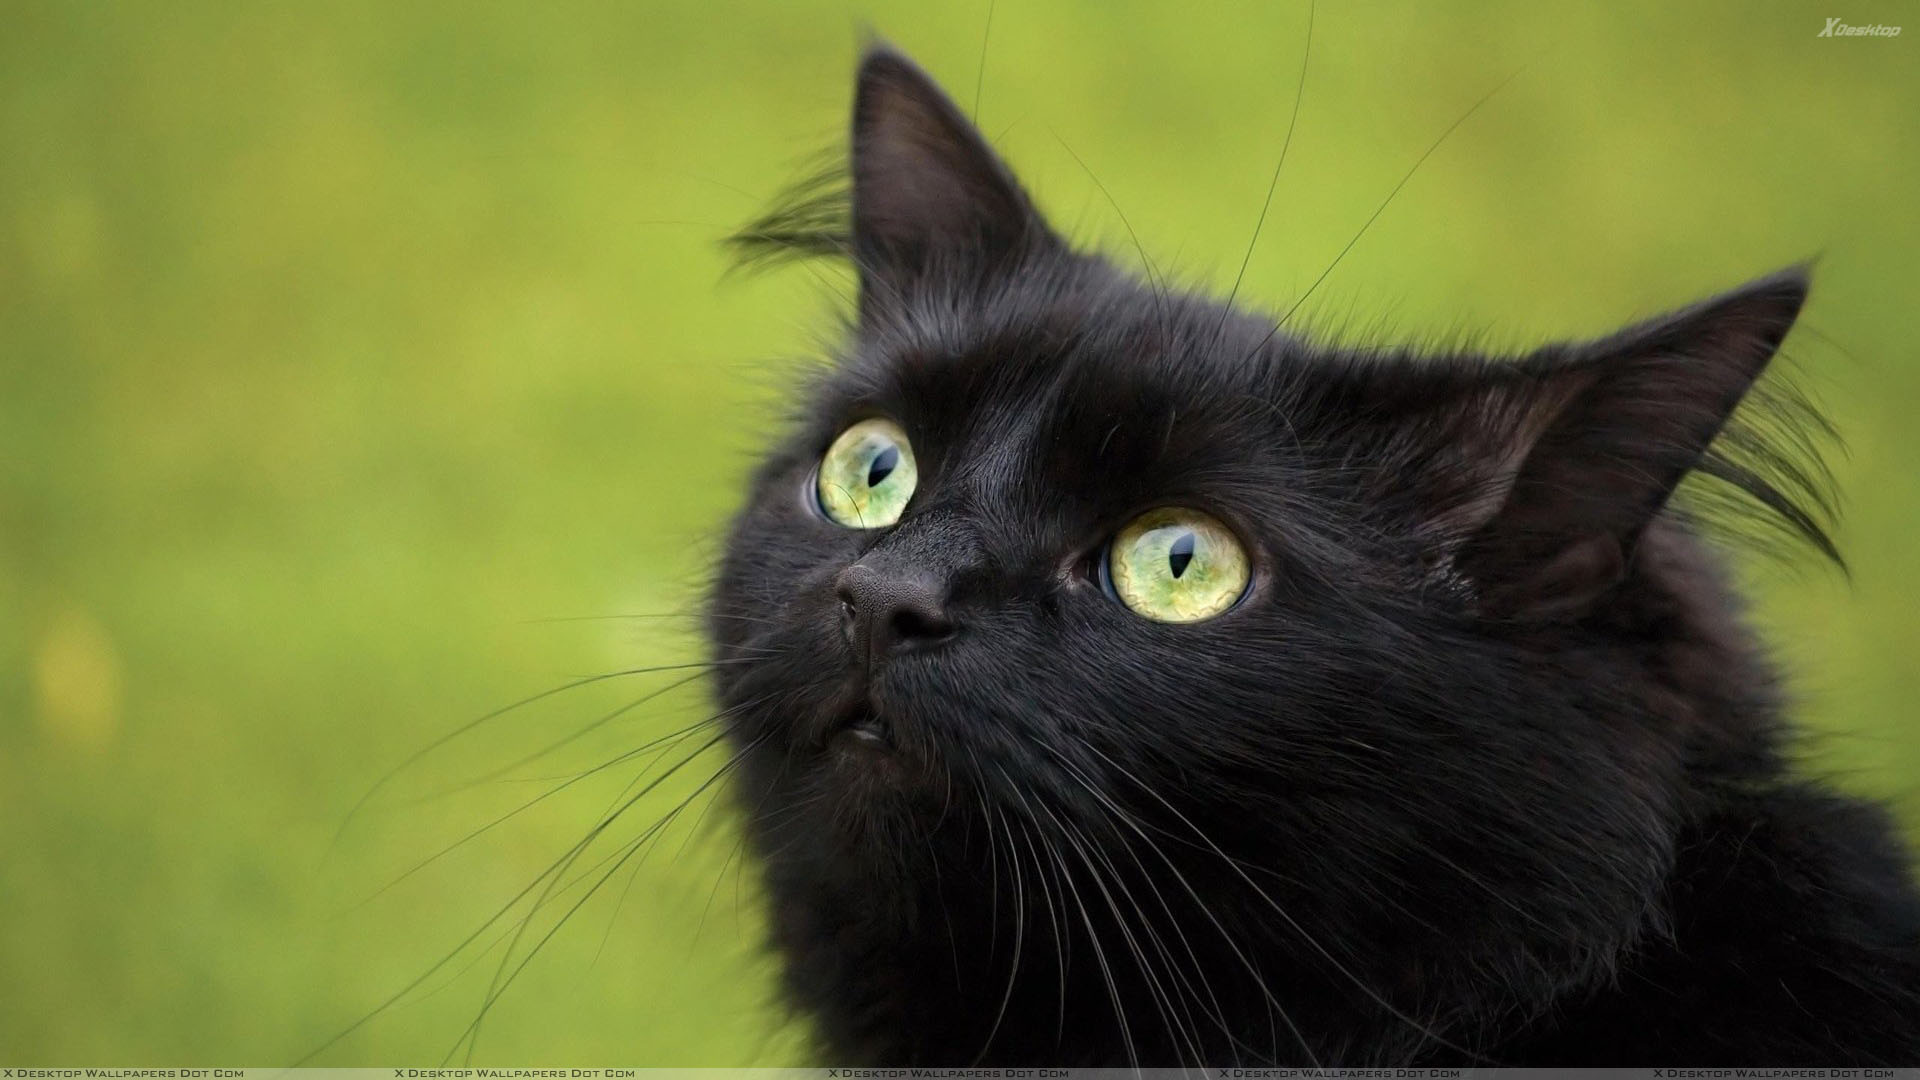 Black Cats Wallpapers Photos Images in HD 1920x1080